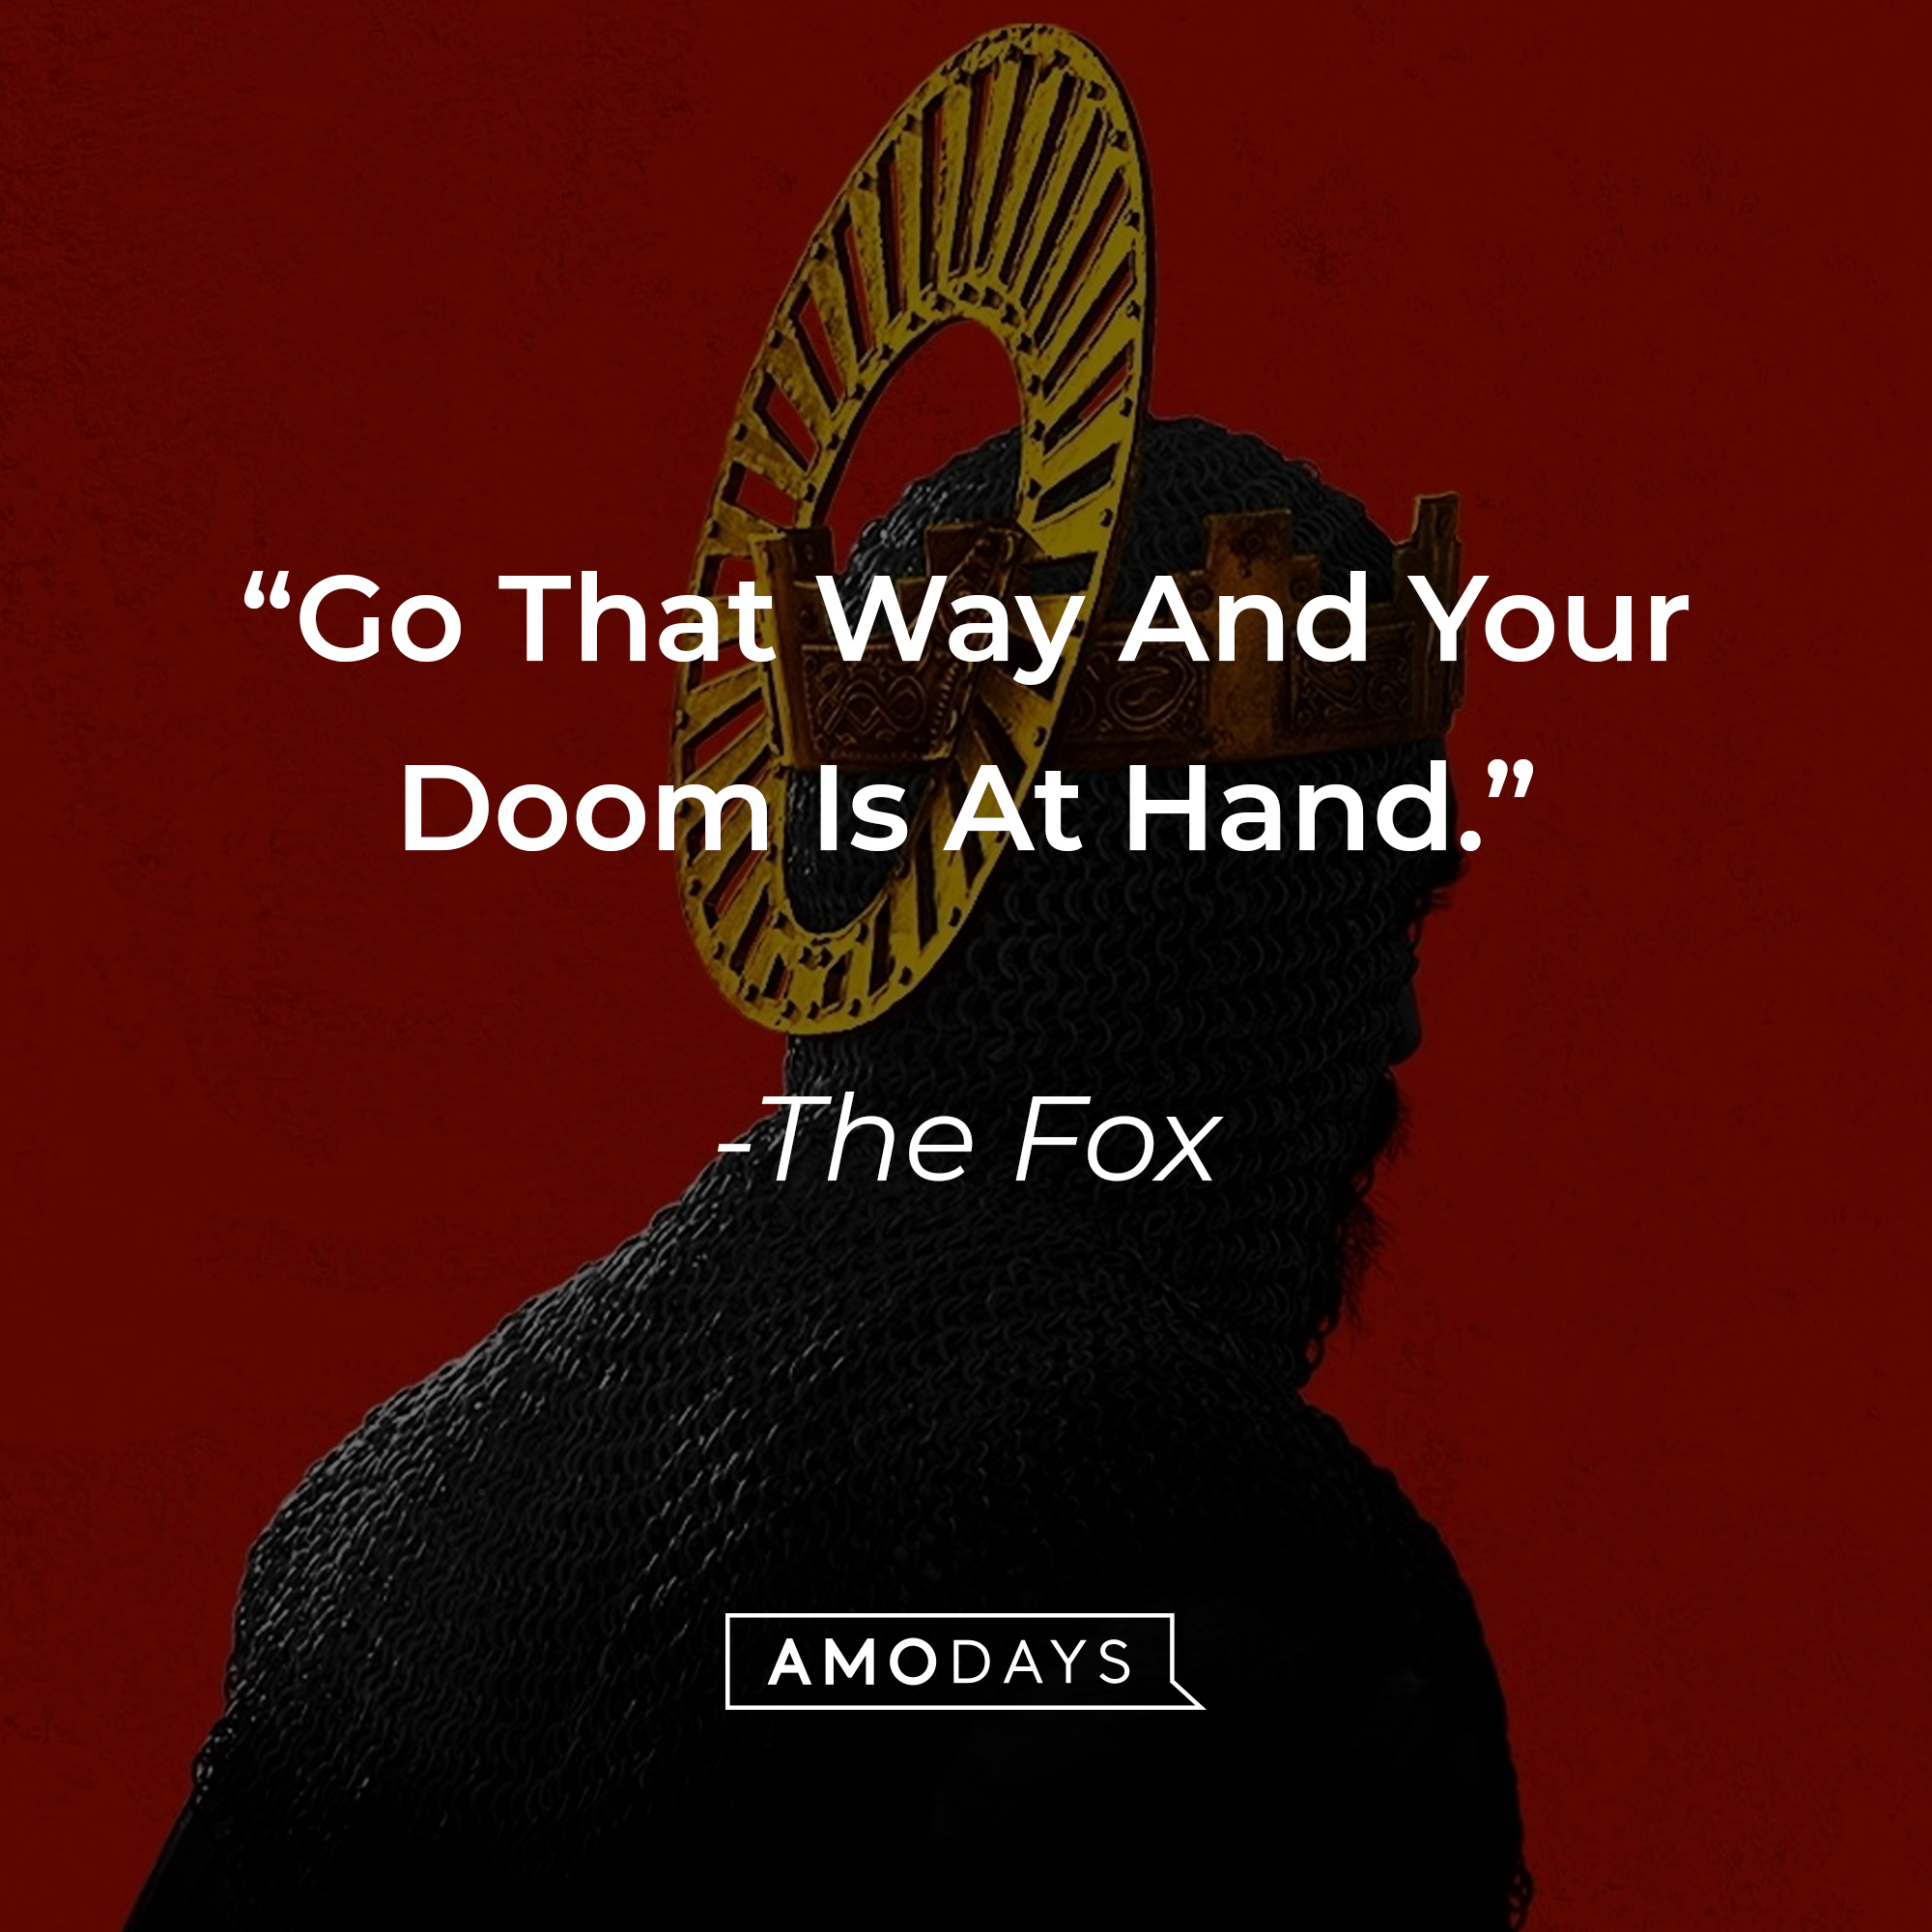 The Fox's quote: "Go That Way And Your Doom Is At Hand." | Source: facebook.com/TheGreenKnight